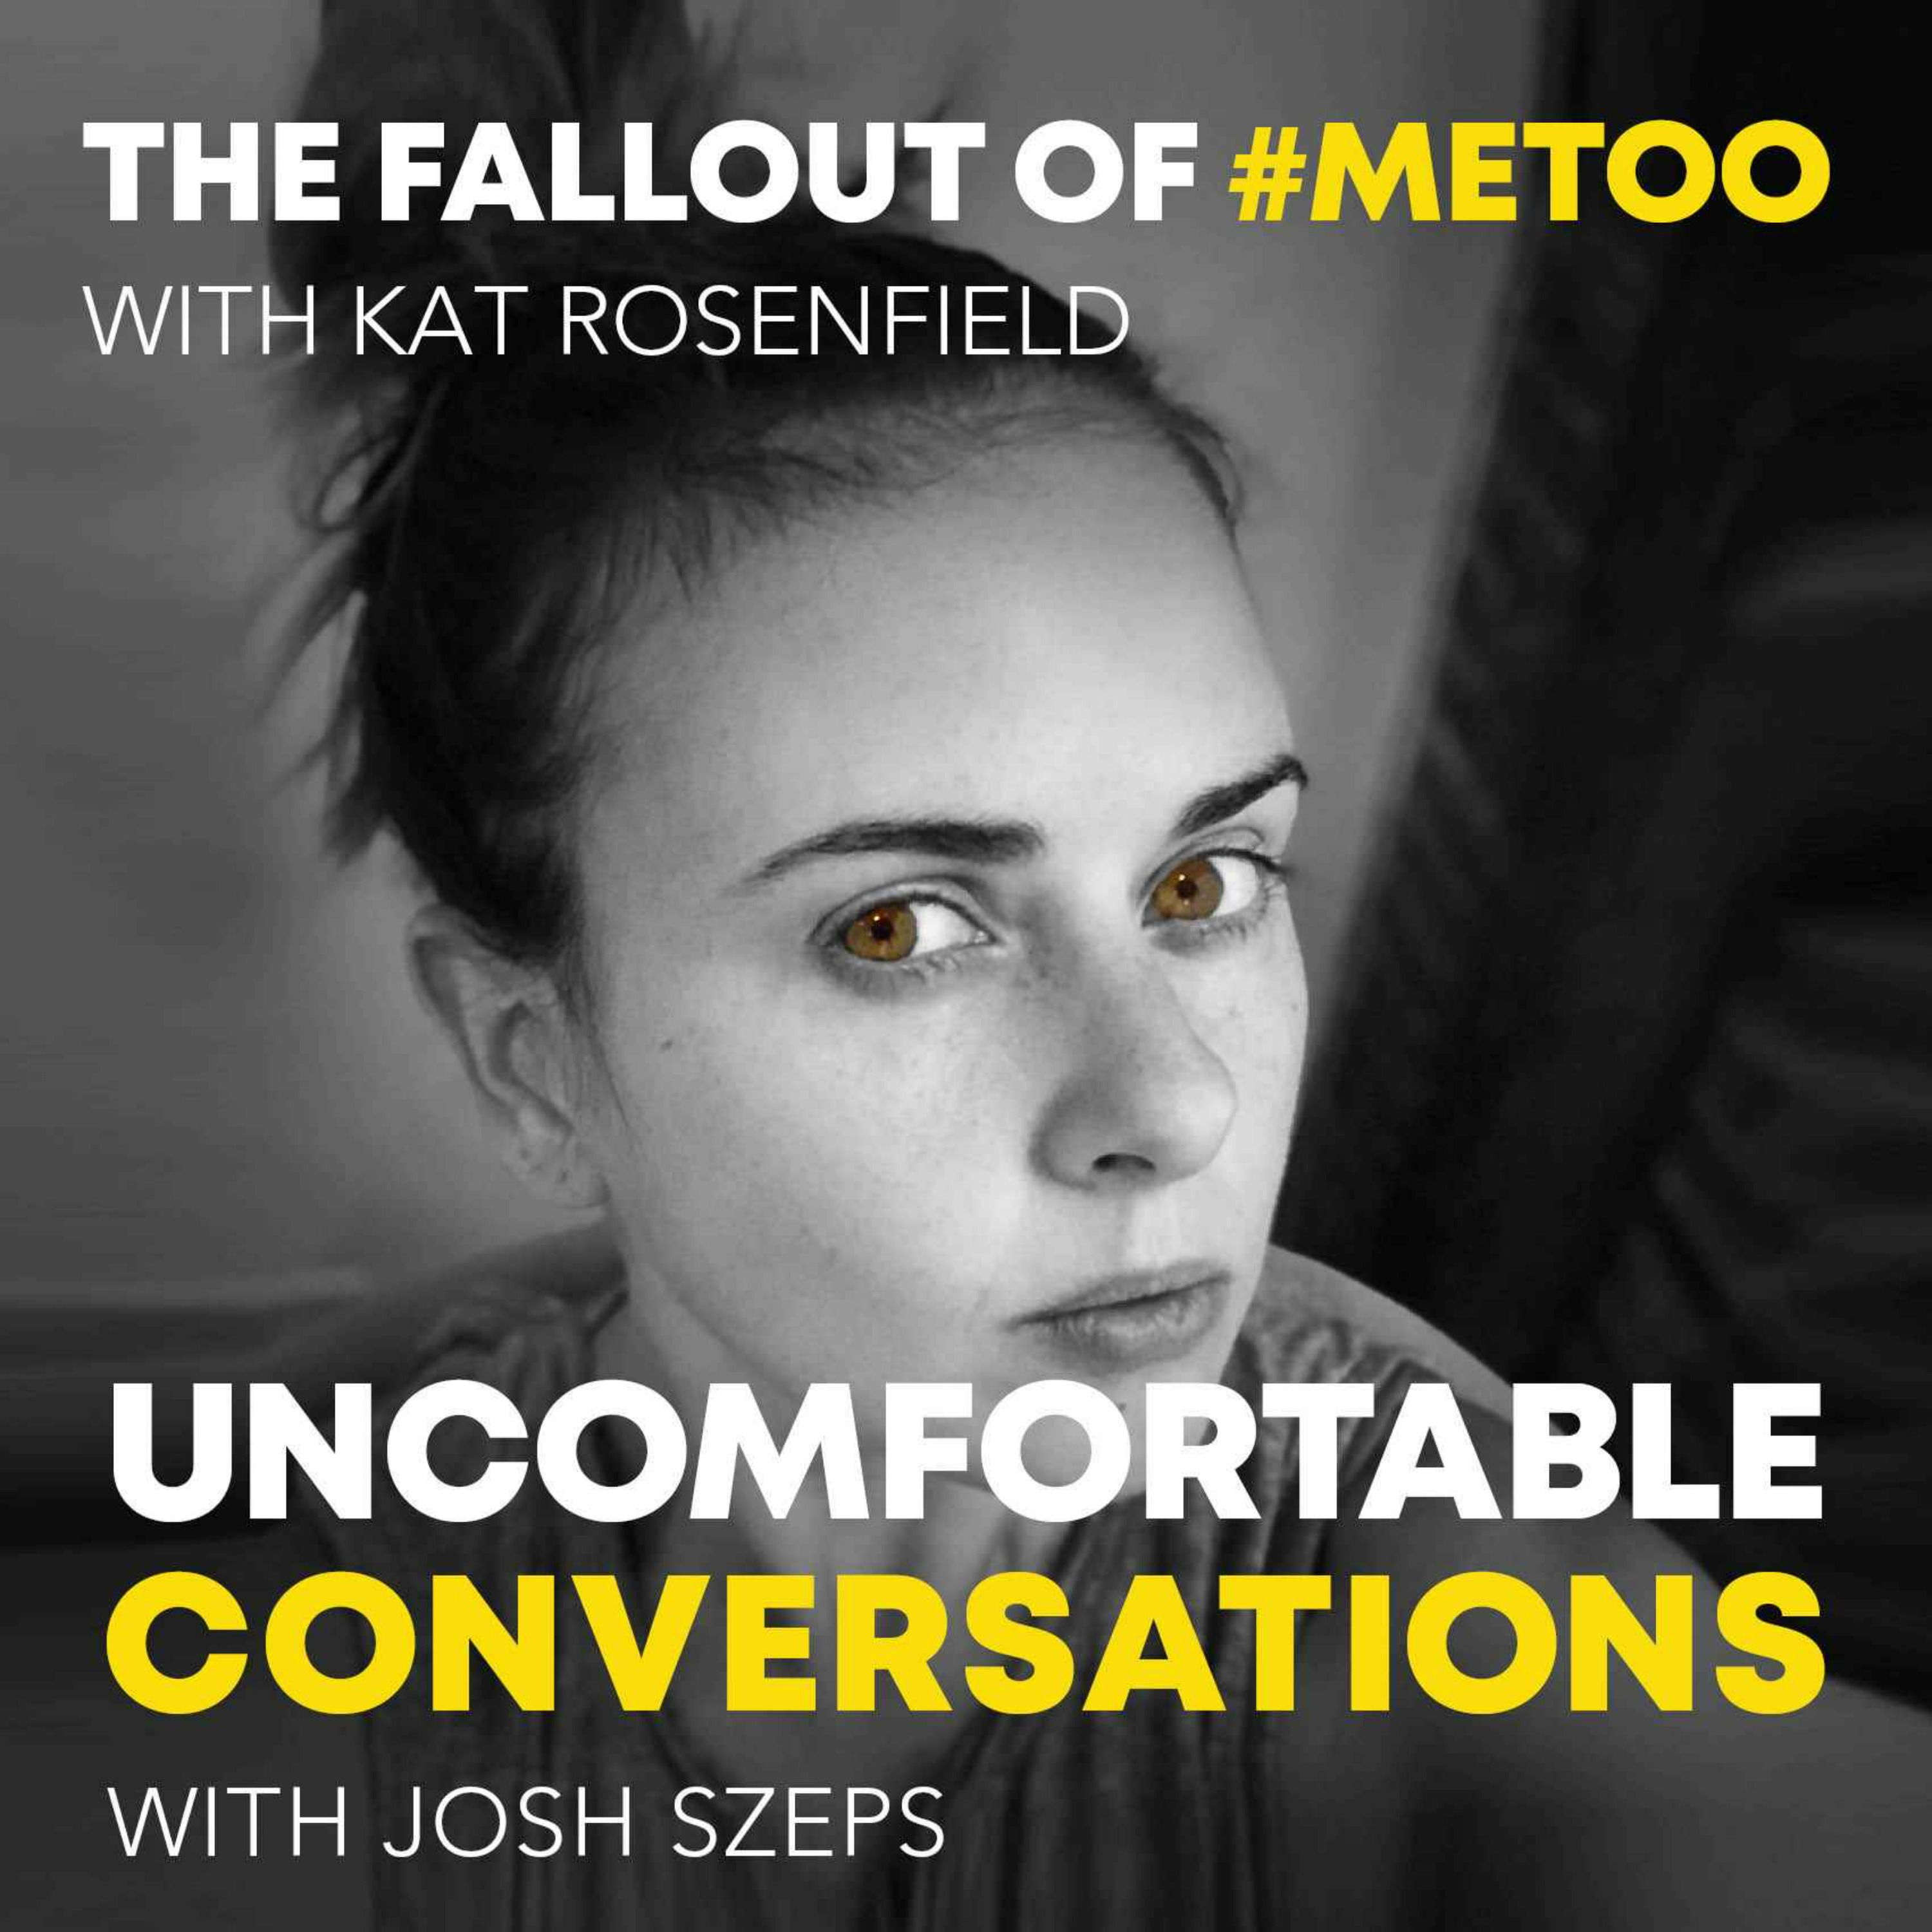 "The Fallout of #MeToo" with Kat Rosenfield